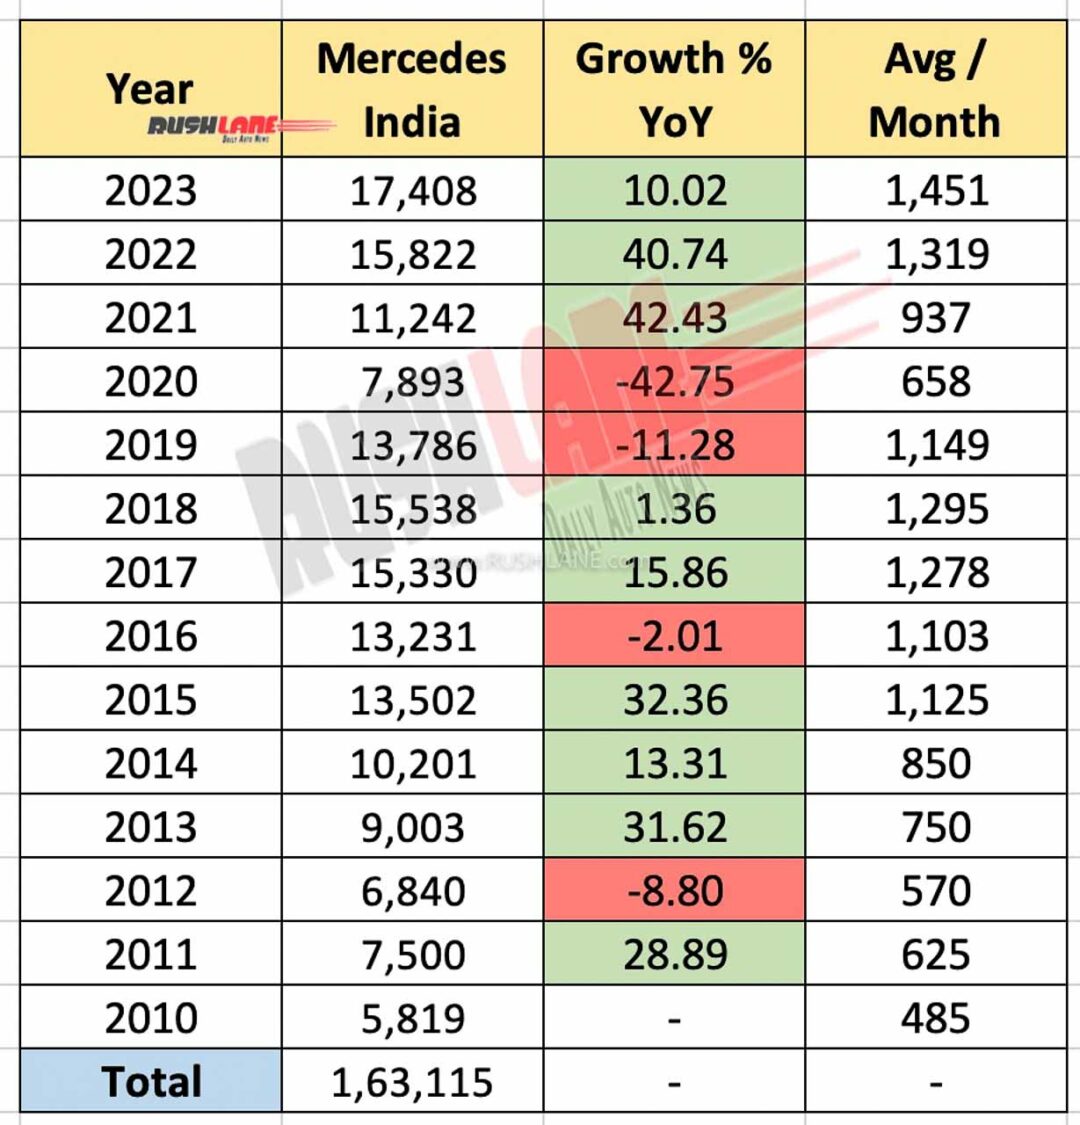 Mercedes-Benz India 2023 Sales in the Fast Lane